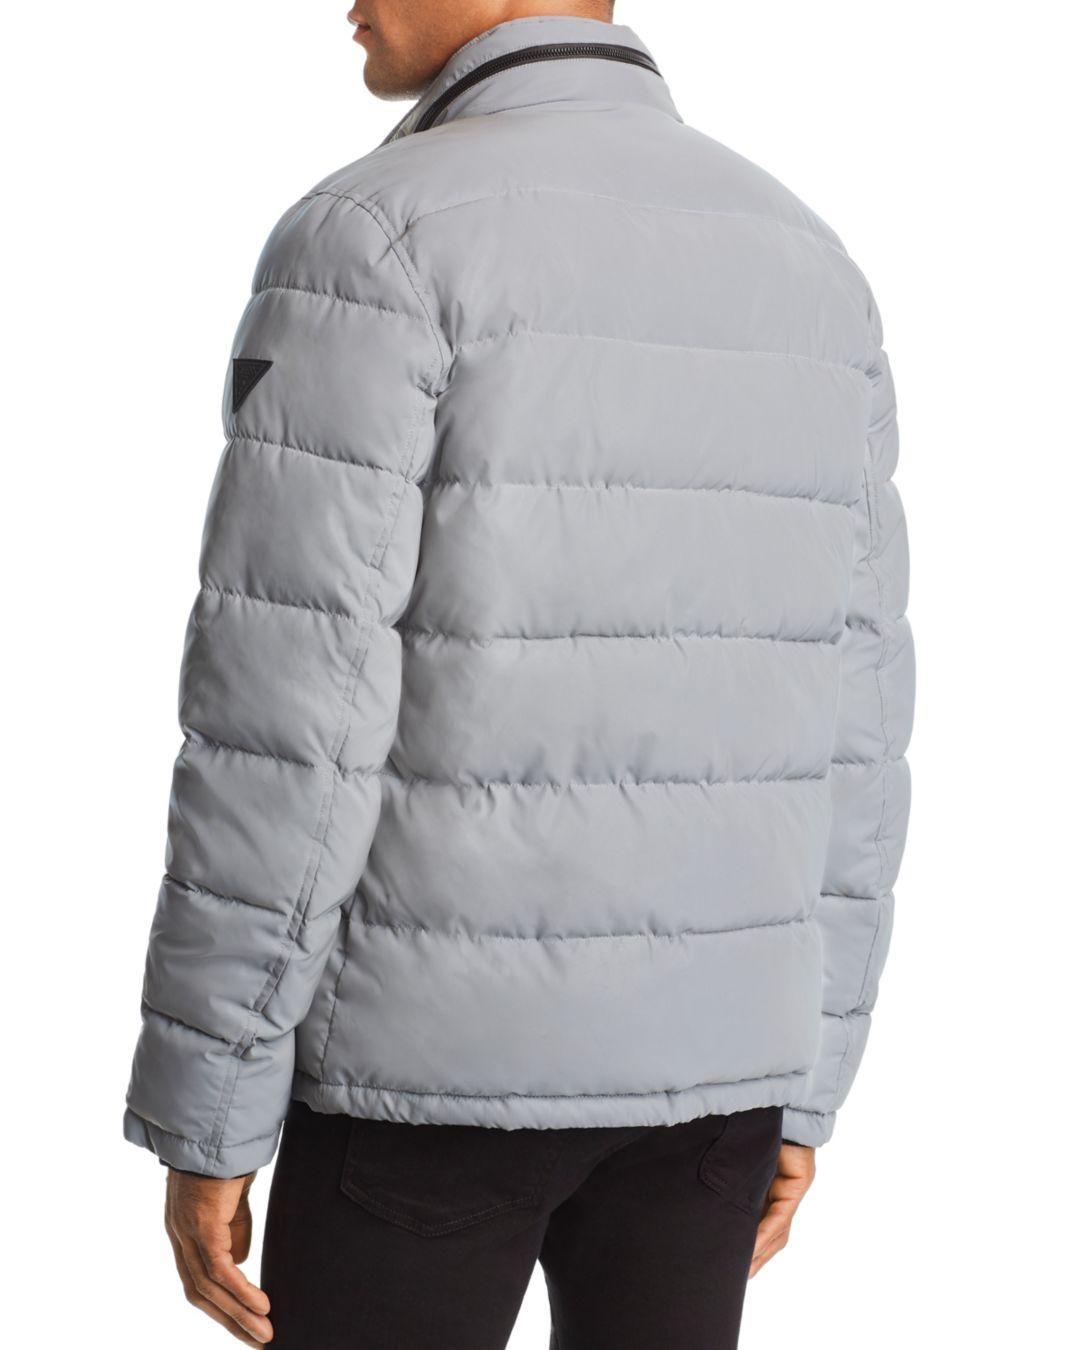 Guess Benjamin Reflective Puffer Jacket in Gray for Men - Lyst